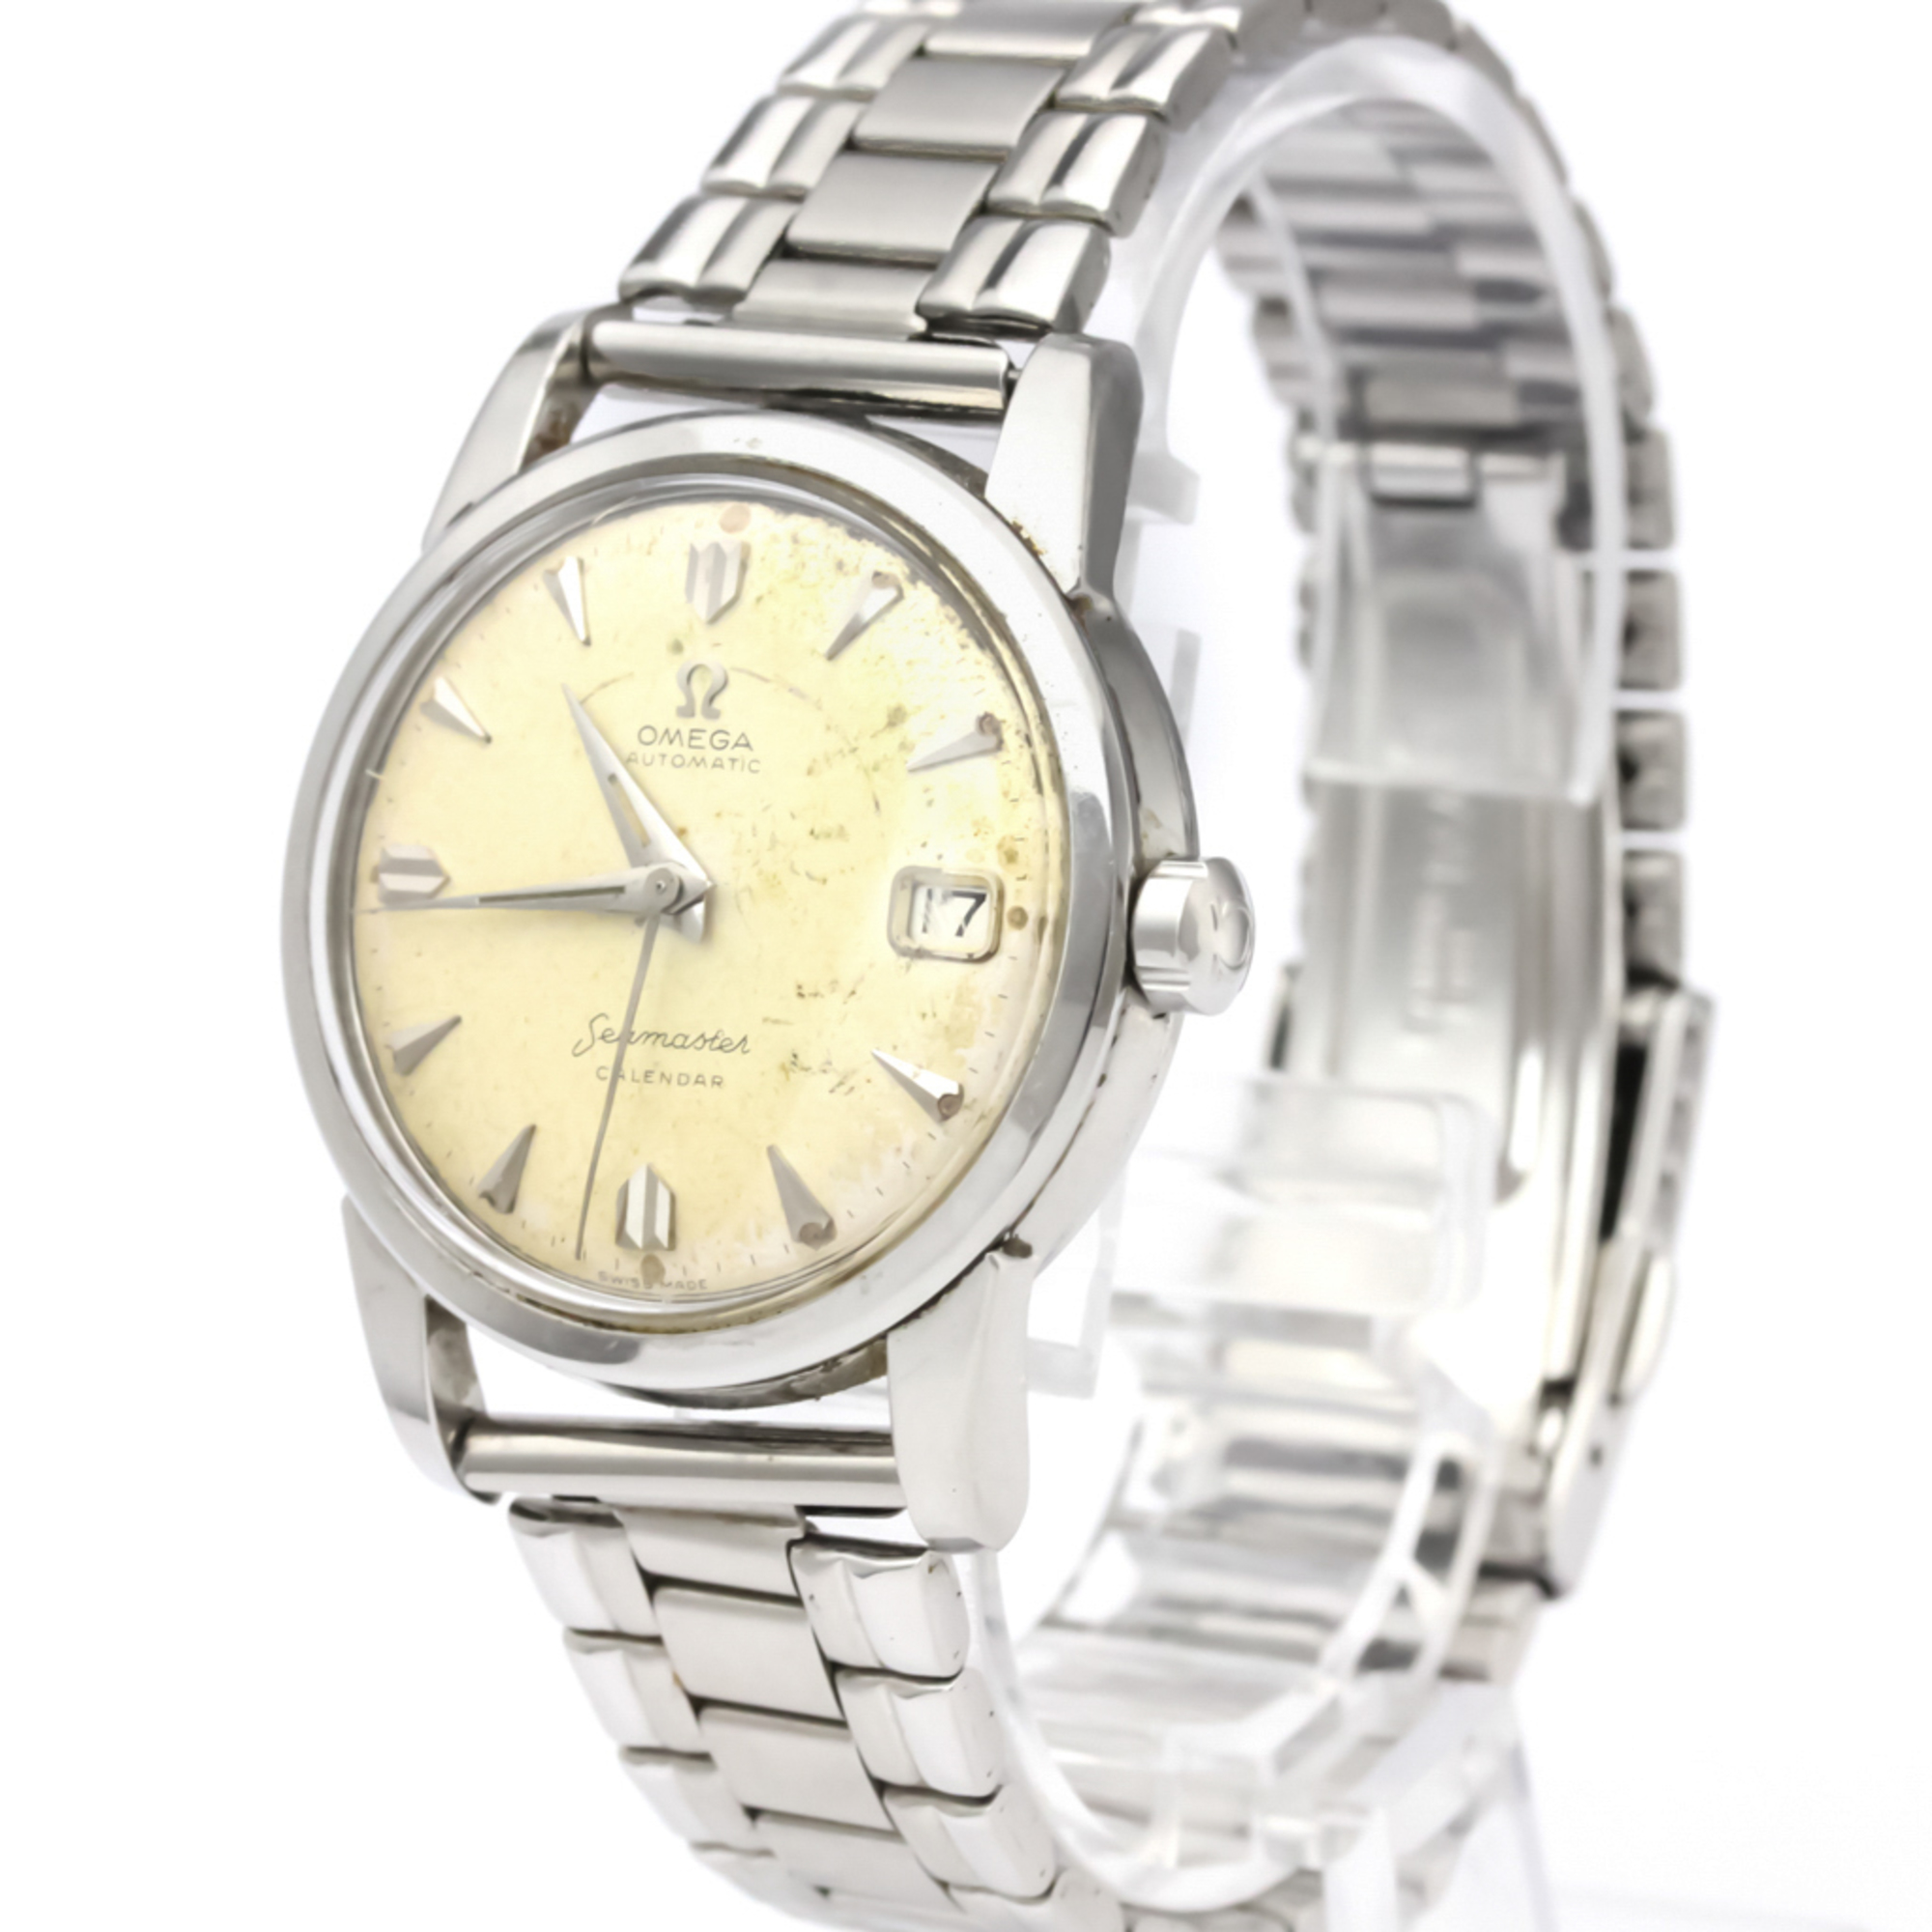 Omega Seamaster Automatic Stainless Steel Men's Dress Watch 2849